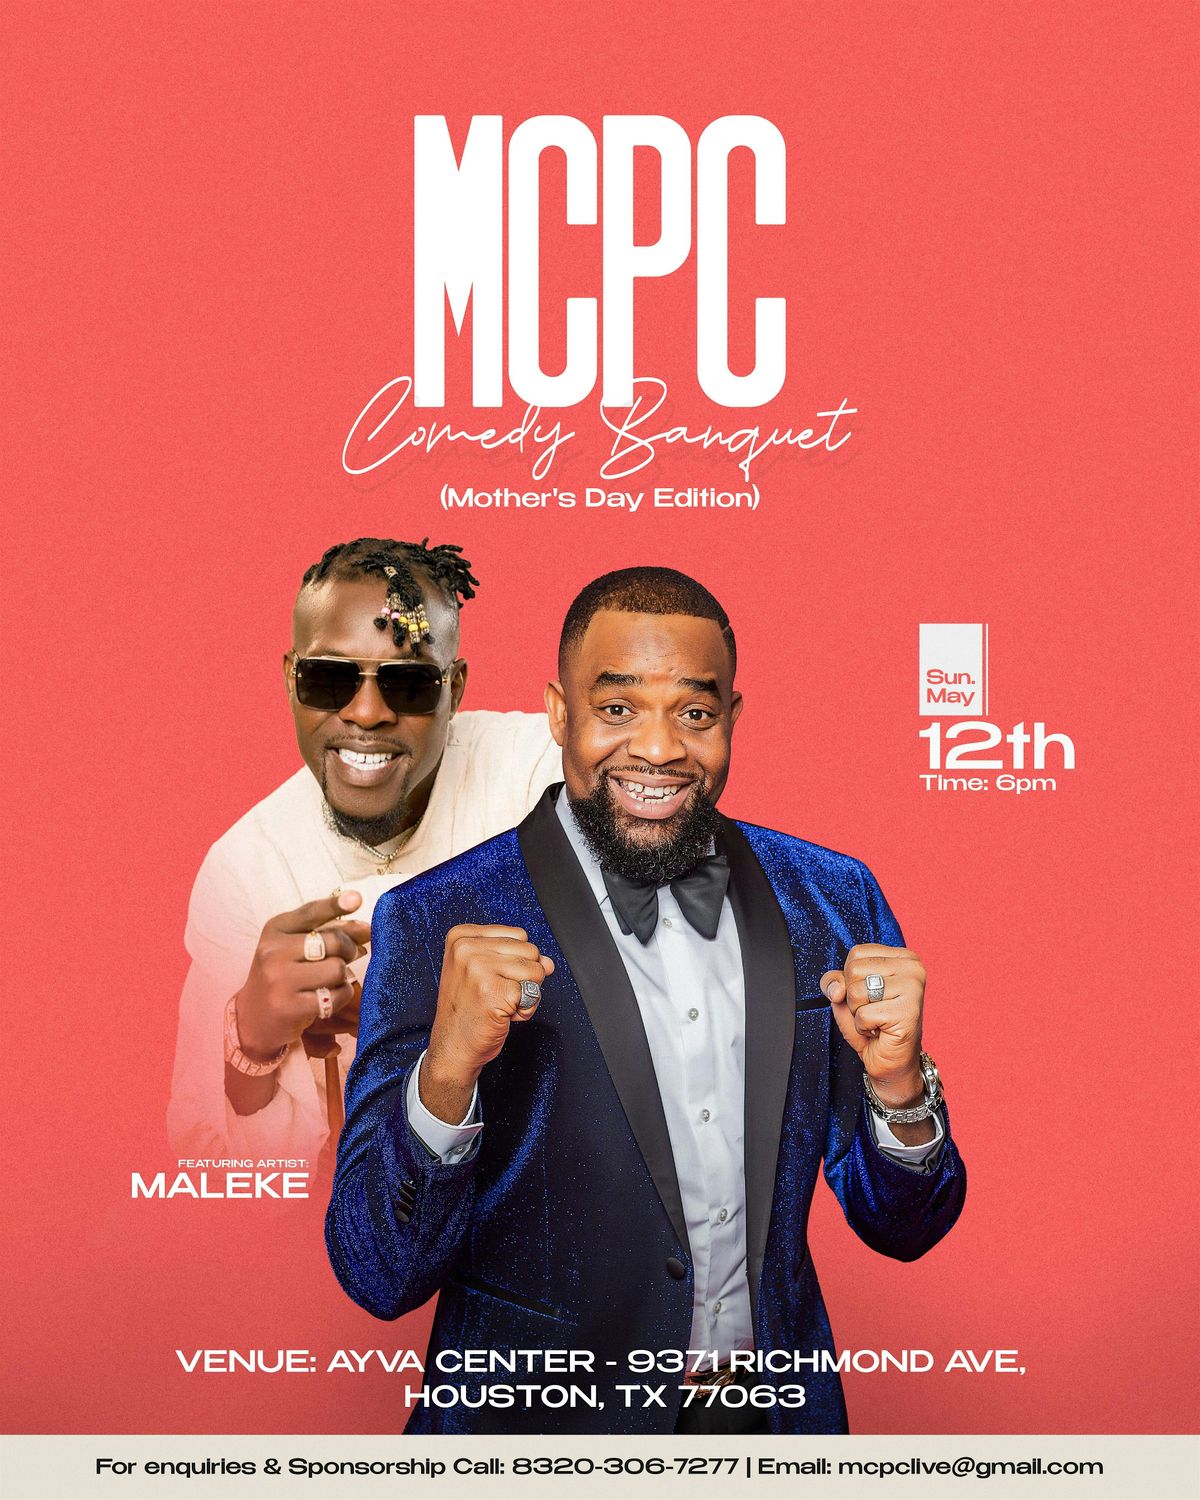 MCPC Comedy Banquet  - Mother's Day Edition